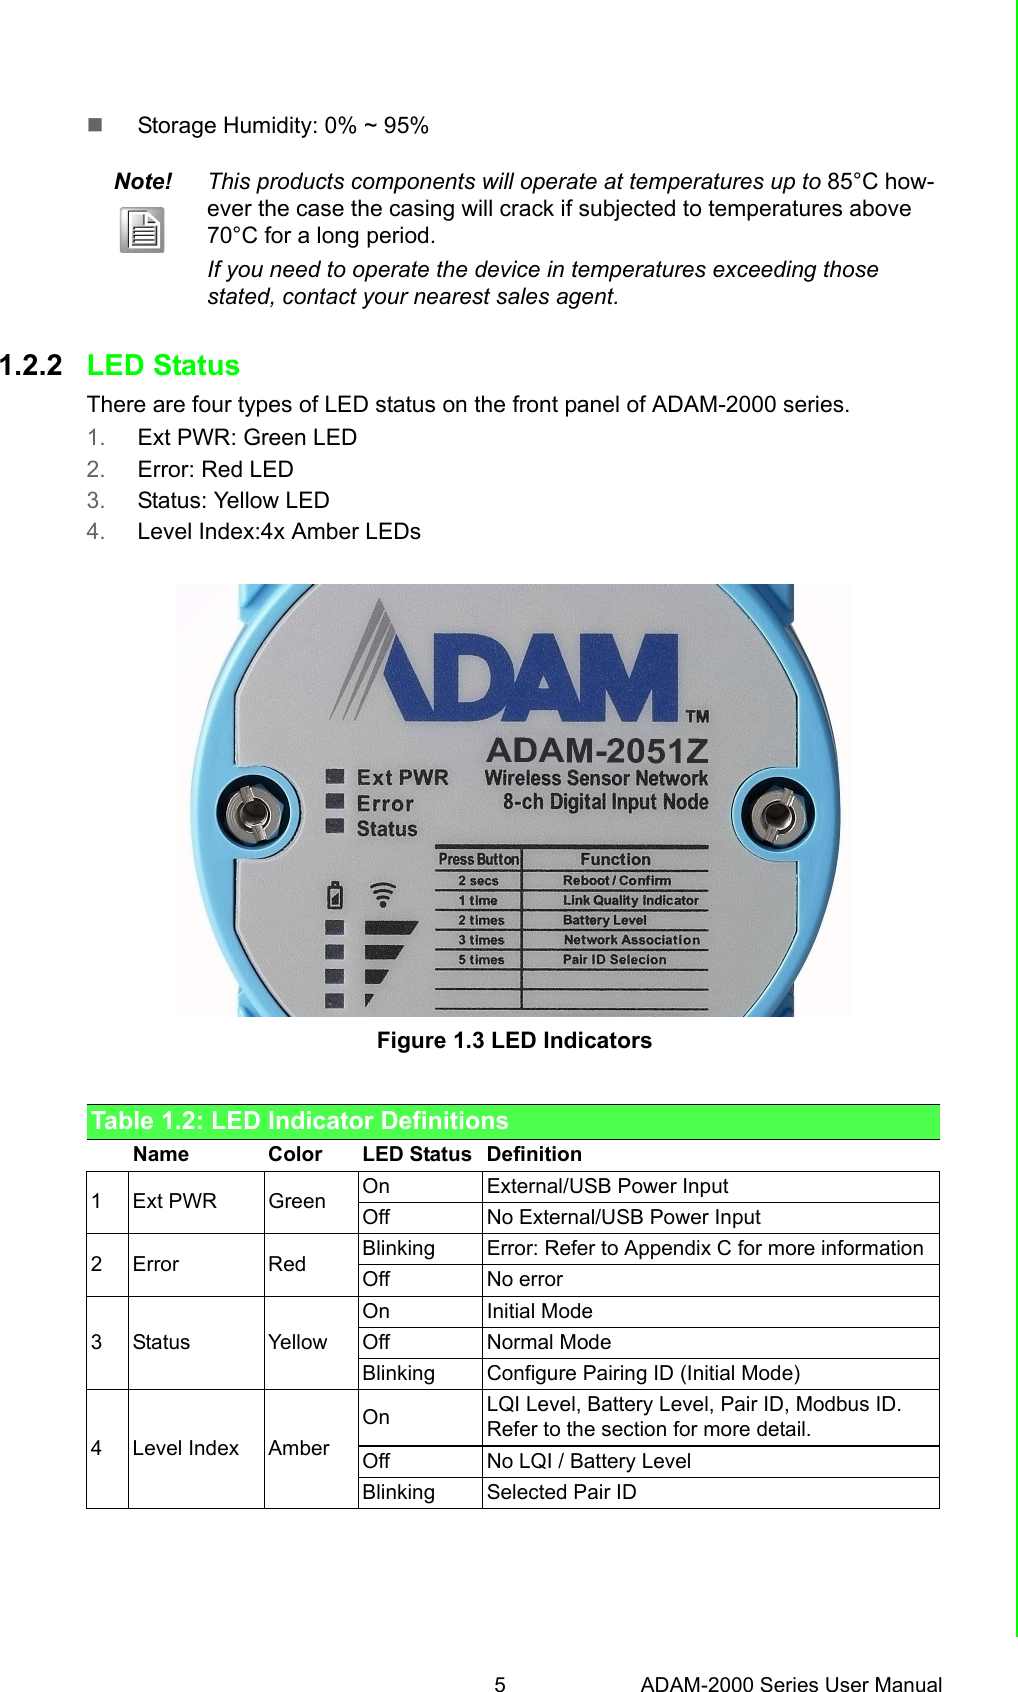 5 ADAM-2000 Series User ManualChapter 1 Understanding Your SystemStorage Humidity: 0% ~ 95% 1.2.2 LED StatusThere are four types of LED status on the front panel of ADAM-2000 series.1. Ext PWR: Green LED2. Error: Red LED3. Status: Yellow LED4. Level Index:4x Amber LEDsFigure 1.3 LED IndicatorsNote! This products components will operate at temperatures up to 85°C how-ever the case the casing will crack if subjected to temperatures above 70°C for a long period.If you need to operate the device in temperatures exceeding those stated, contact your nearest sales agent.Table 1.2: LED Indicator DefinitionsName Color LED Status Definition1 Ext PWR Green On External/USB Power InputOff No External/USB Power Input2Error Red Blinking Error: Refer to Appendix C for more informationOff No error3 Status YellowOn Initial ModeOff Normal ModeBlinking Configure Pairing ID (Initial Mode)4 Level Index AmberOn LQI Level, Battery Level, Pair ID, Modbus ID.Refer to the section for more detail.Off No LQI / Battery LevelBlinking Selected Pair ID